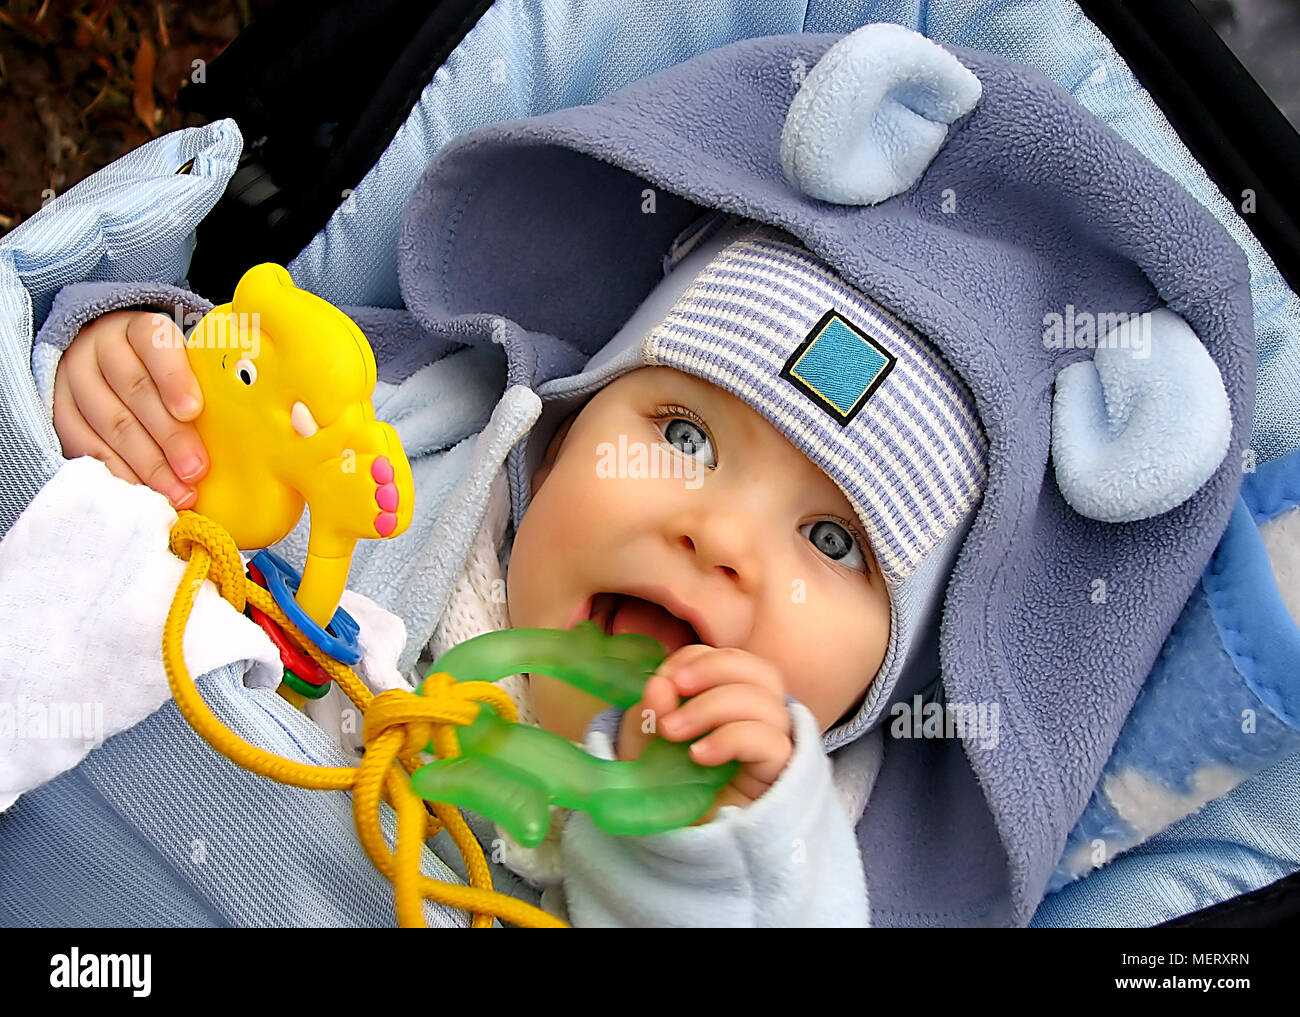 A baby lying and teething a green toy, outdoor. Stock Photo